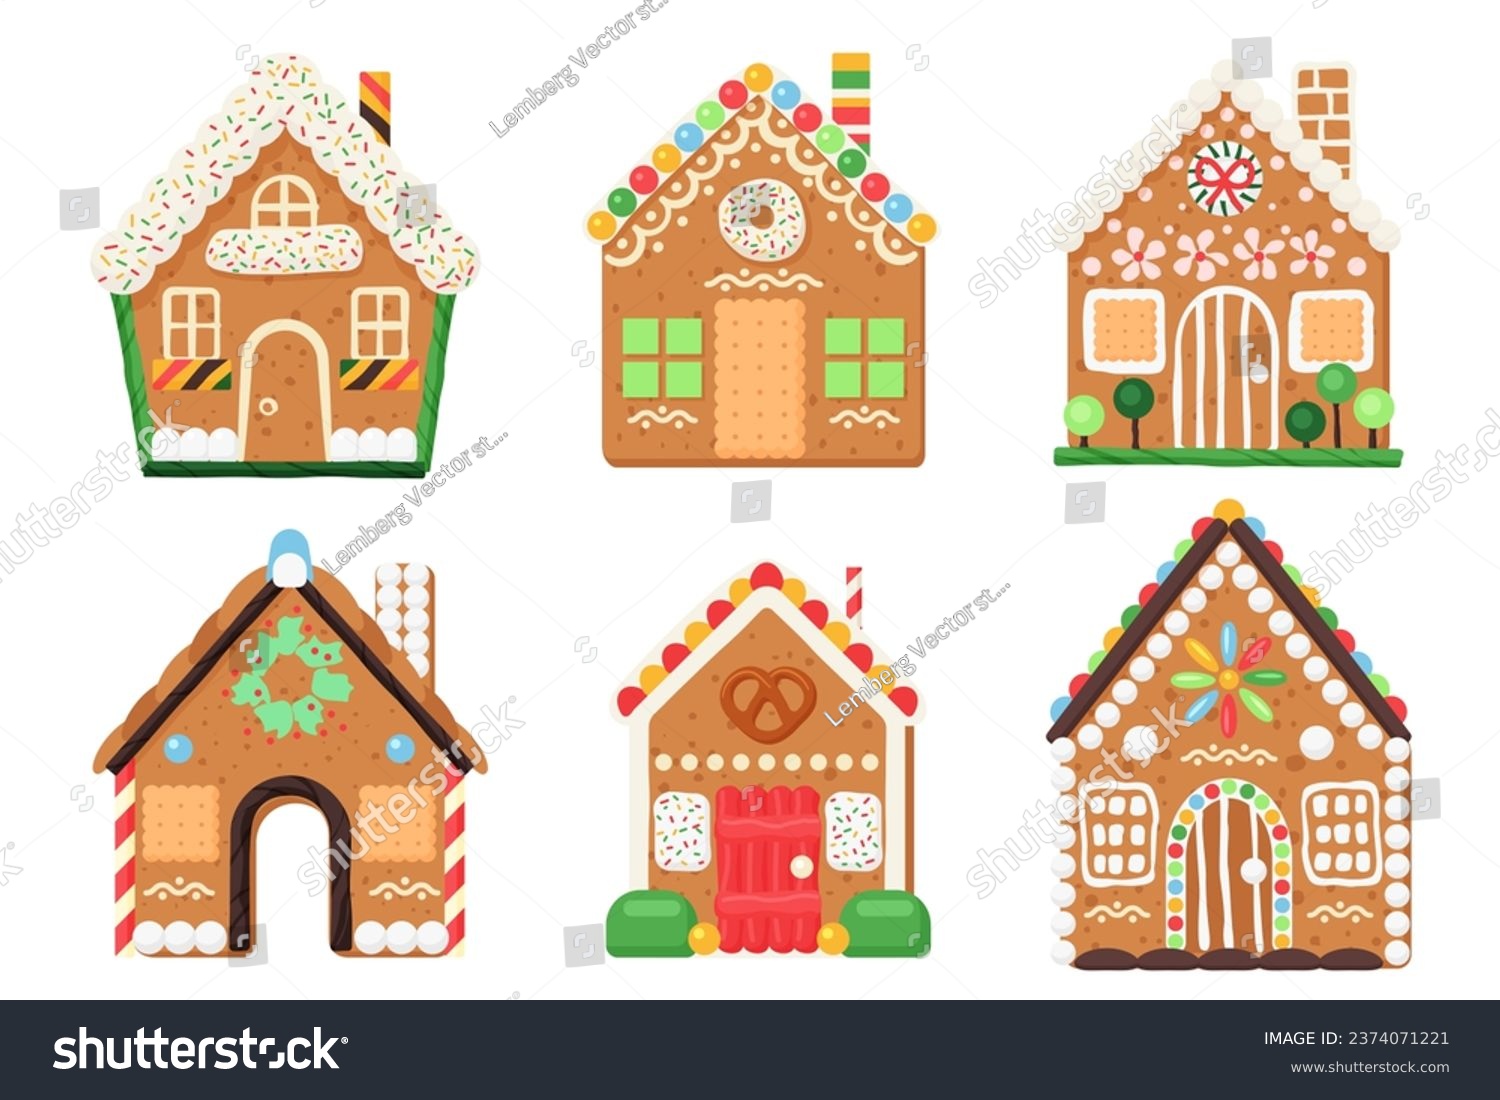 Vector illustration of gingerbread houses. Cartoon baked town buildings with candy, sugar icing snowflakes, and chocolate decorations on windows and doors. #2374071221